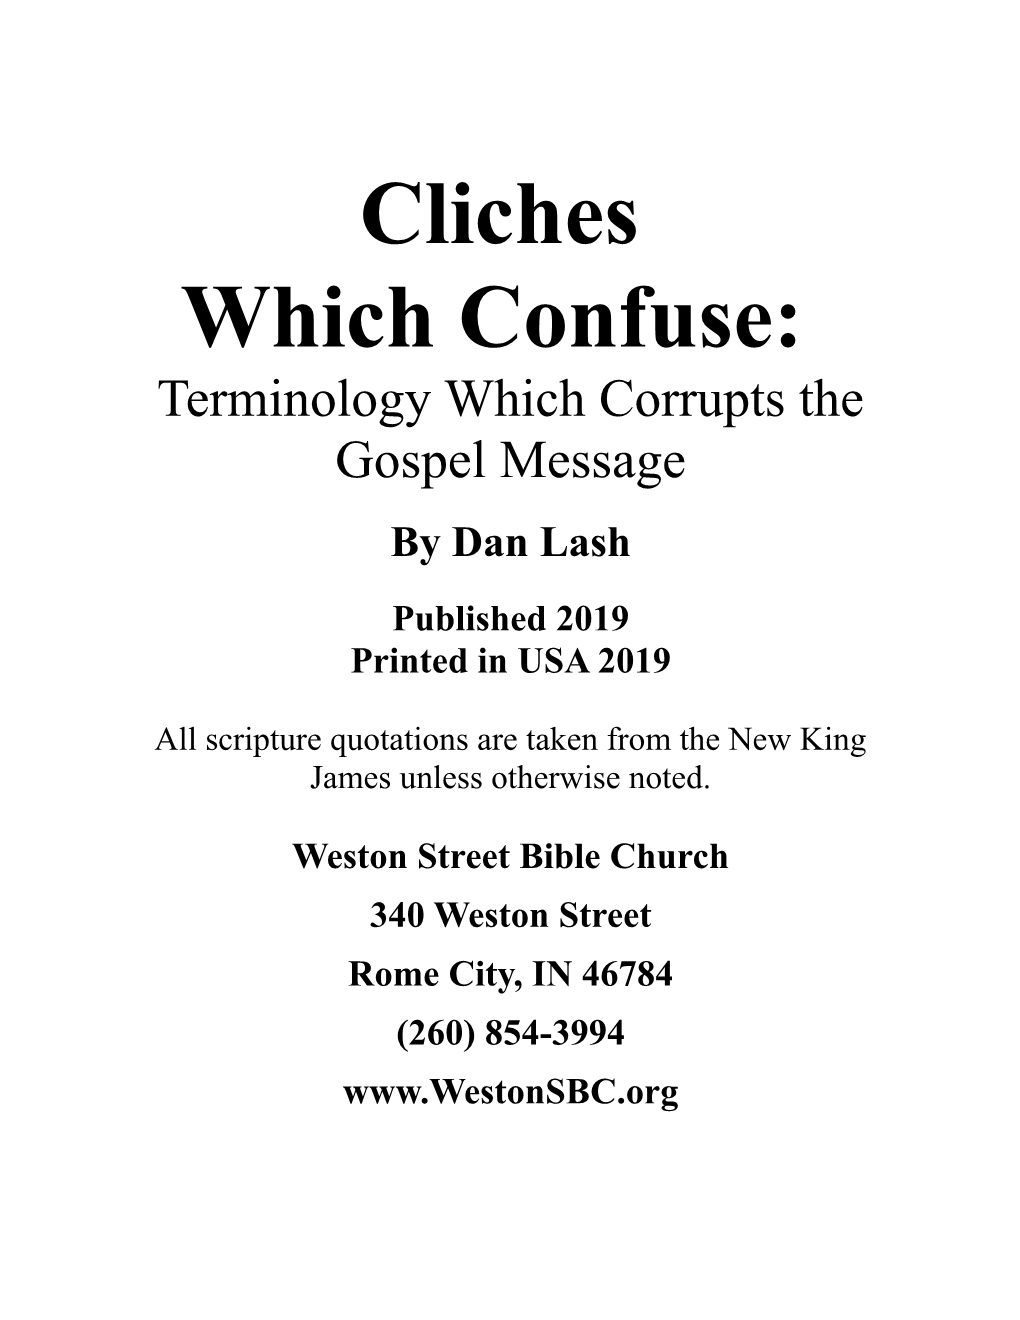 Cliches Which Confuse: Terminology Which Corrupts the Gospel Message by Dan Lash Published 2019 Printed in USA 2019